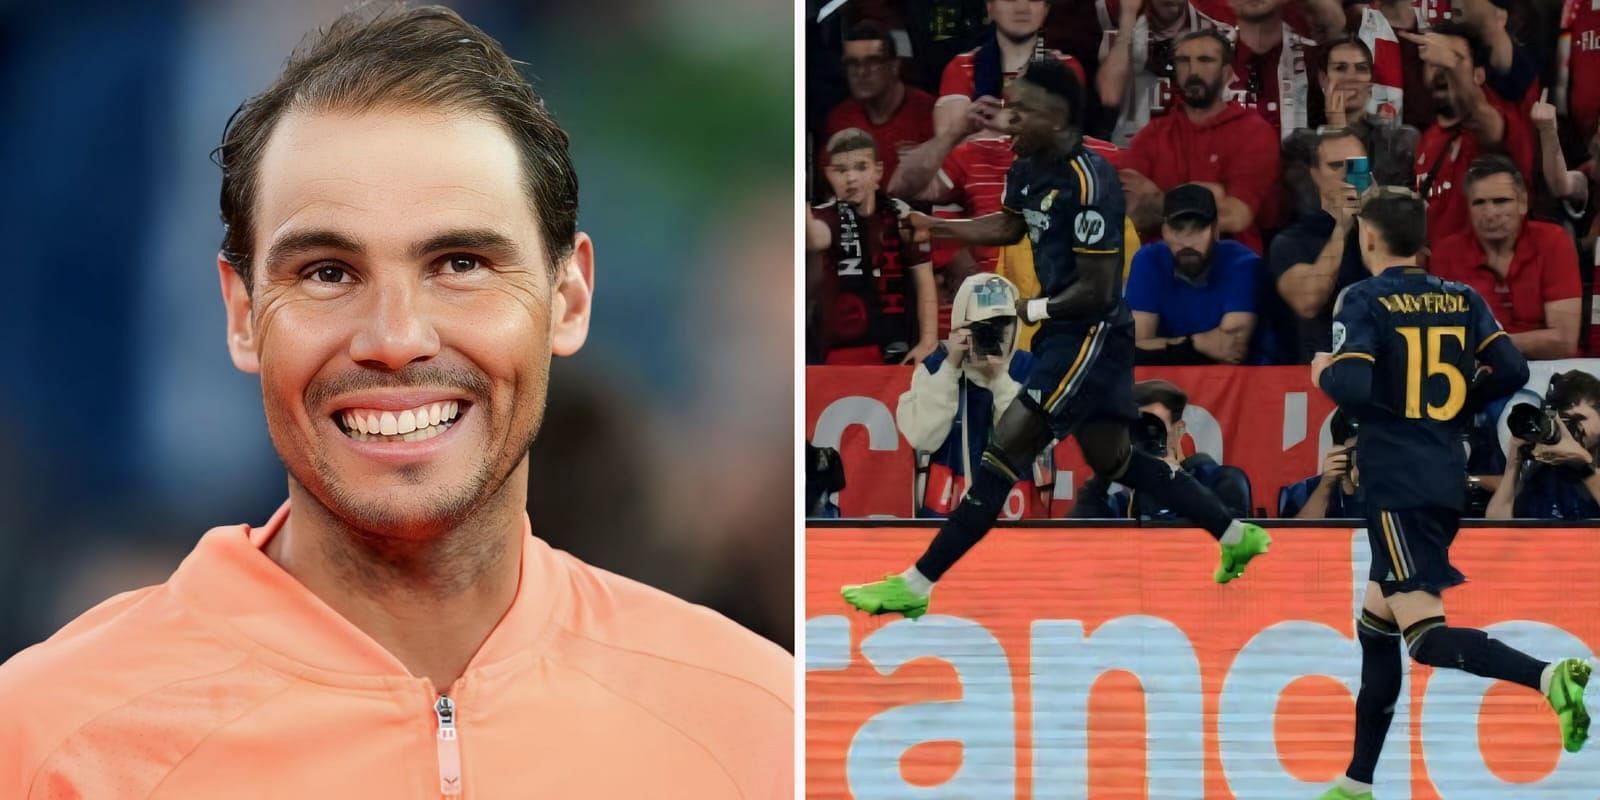 Rafael Nadal displays his passion for Real Madrid during Madrid Open 4R loss, asks his team for score updates on Champions League SF vs Bayern Munich